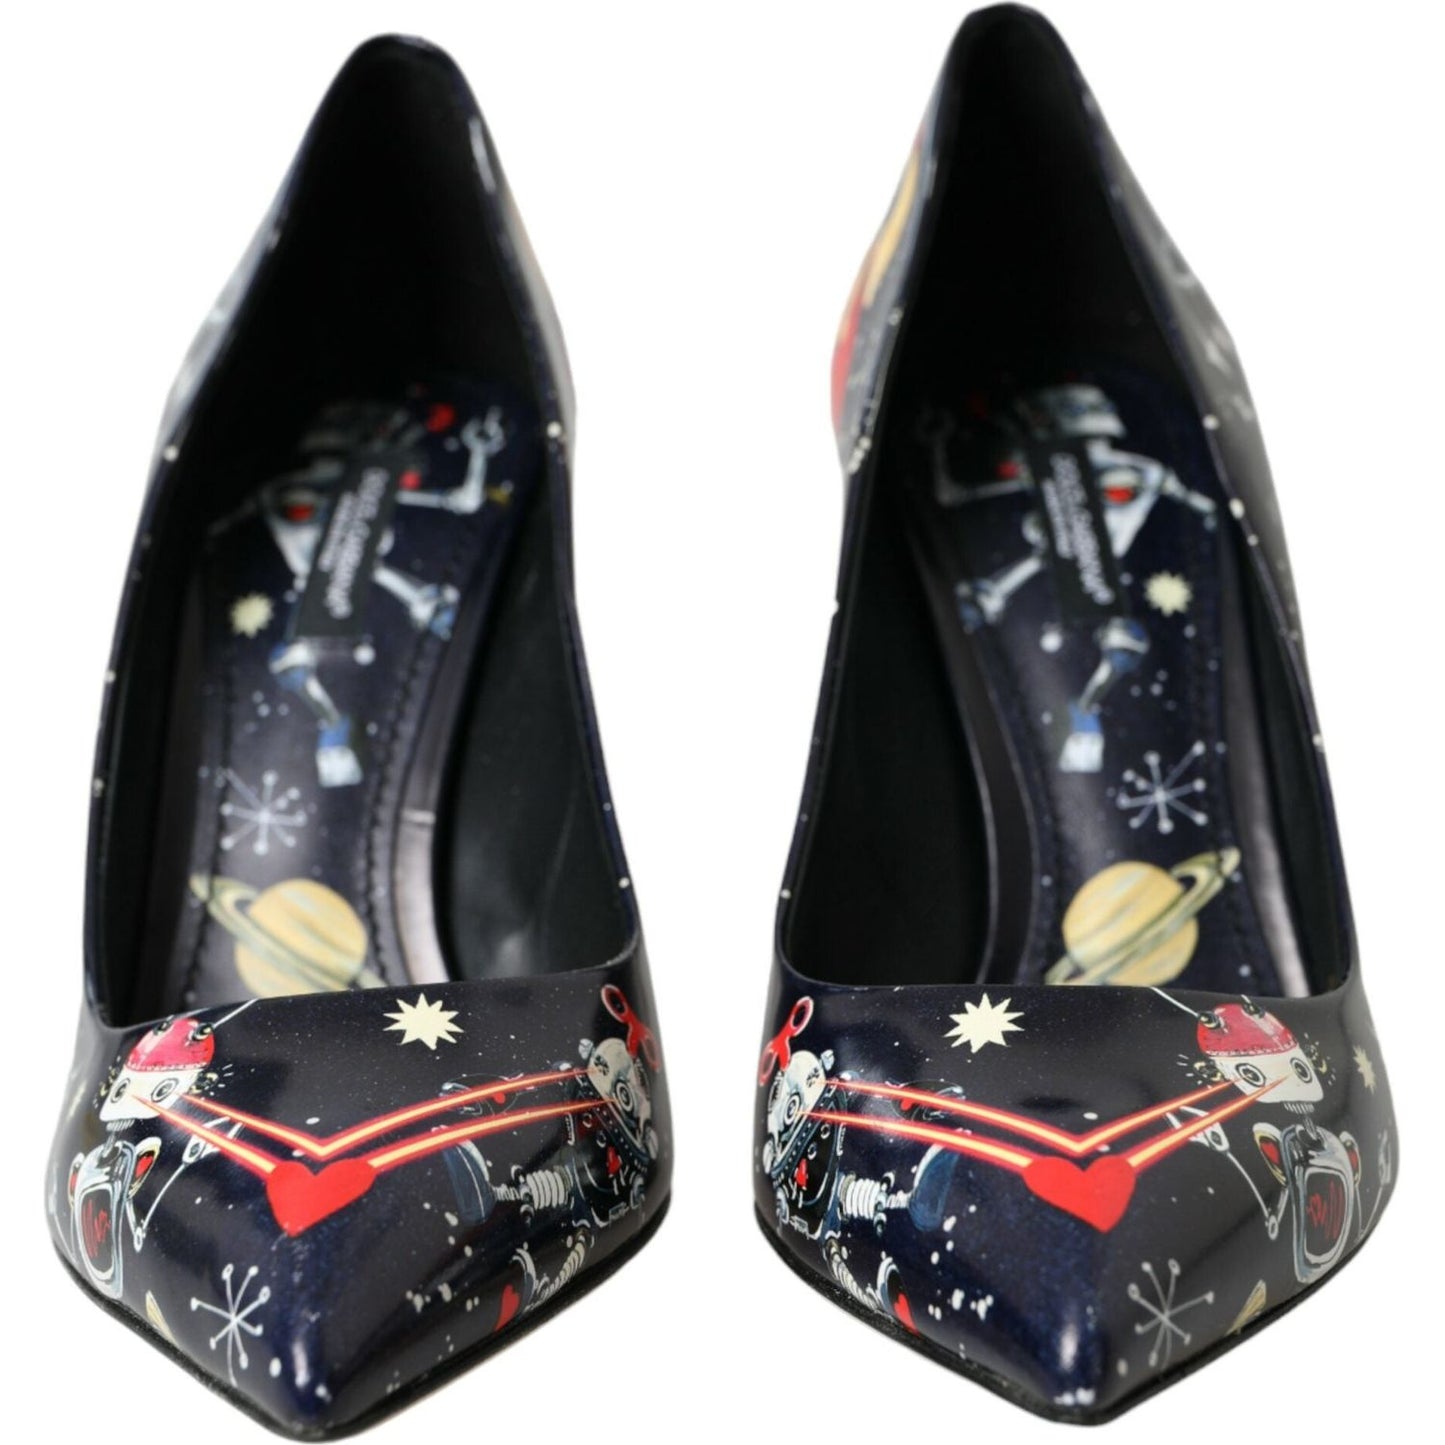 Dolce & Gabbana Blue Space Robot Leather Heels Pumps Shoes blue-space-robot-leather-heels-pumps-shoes